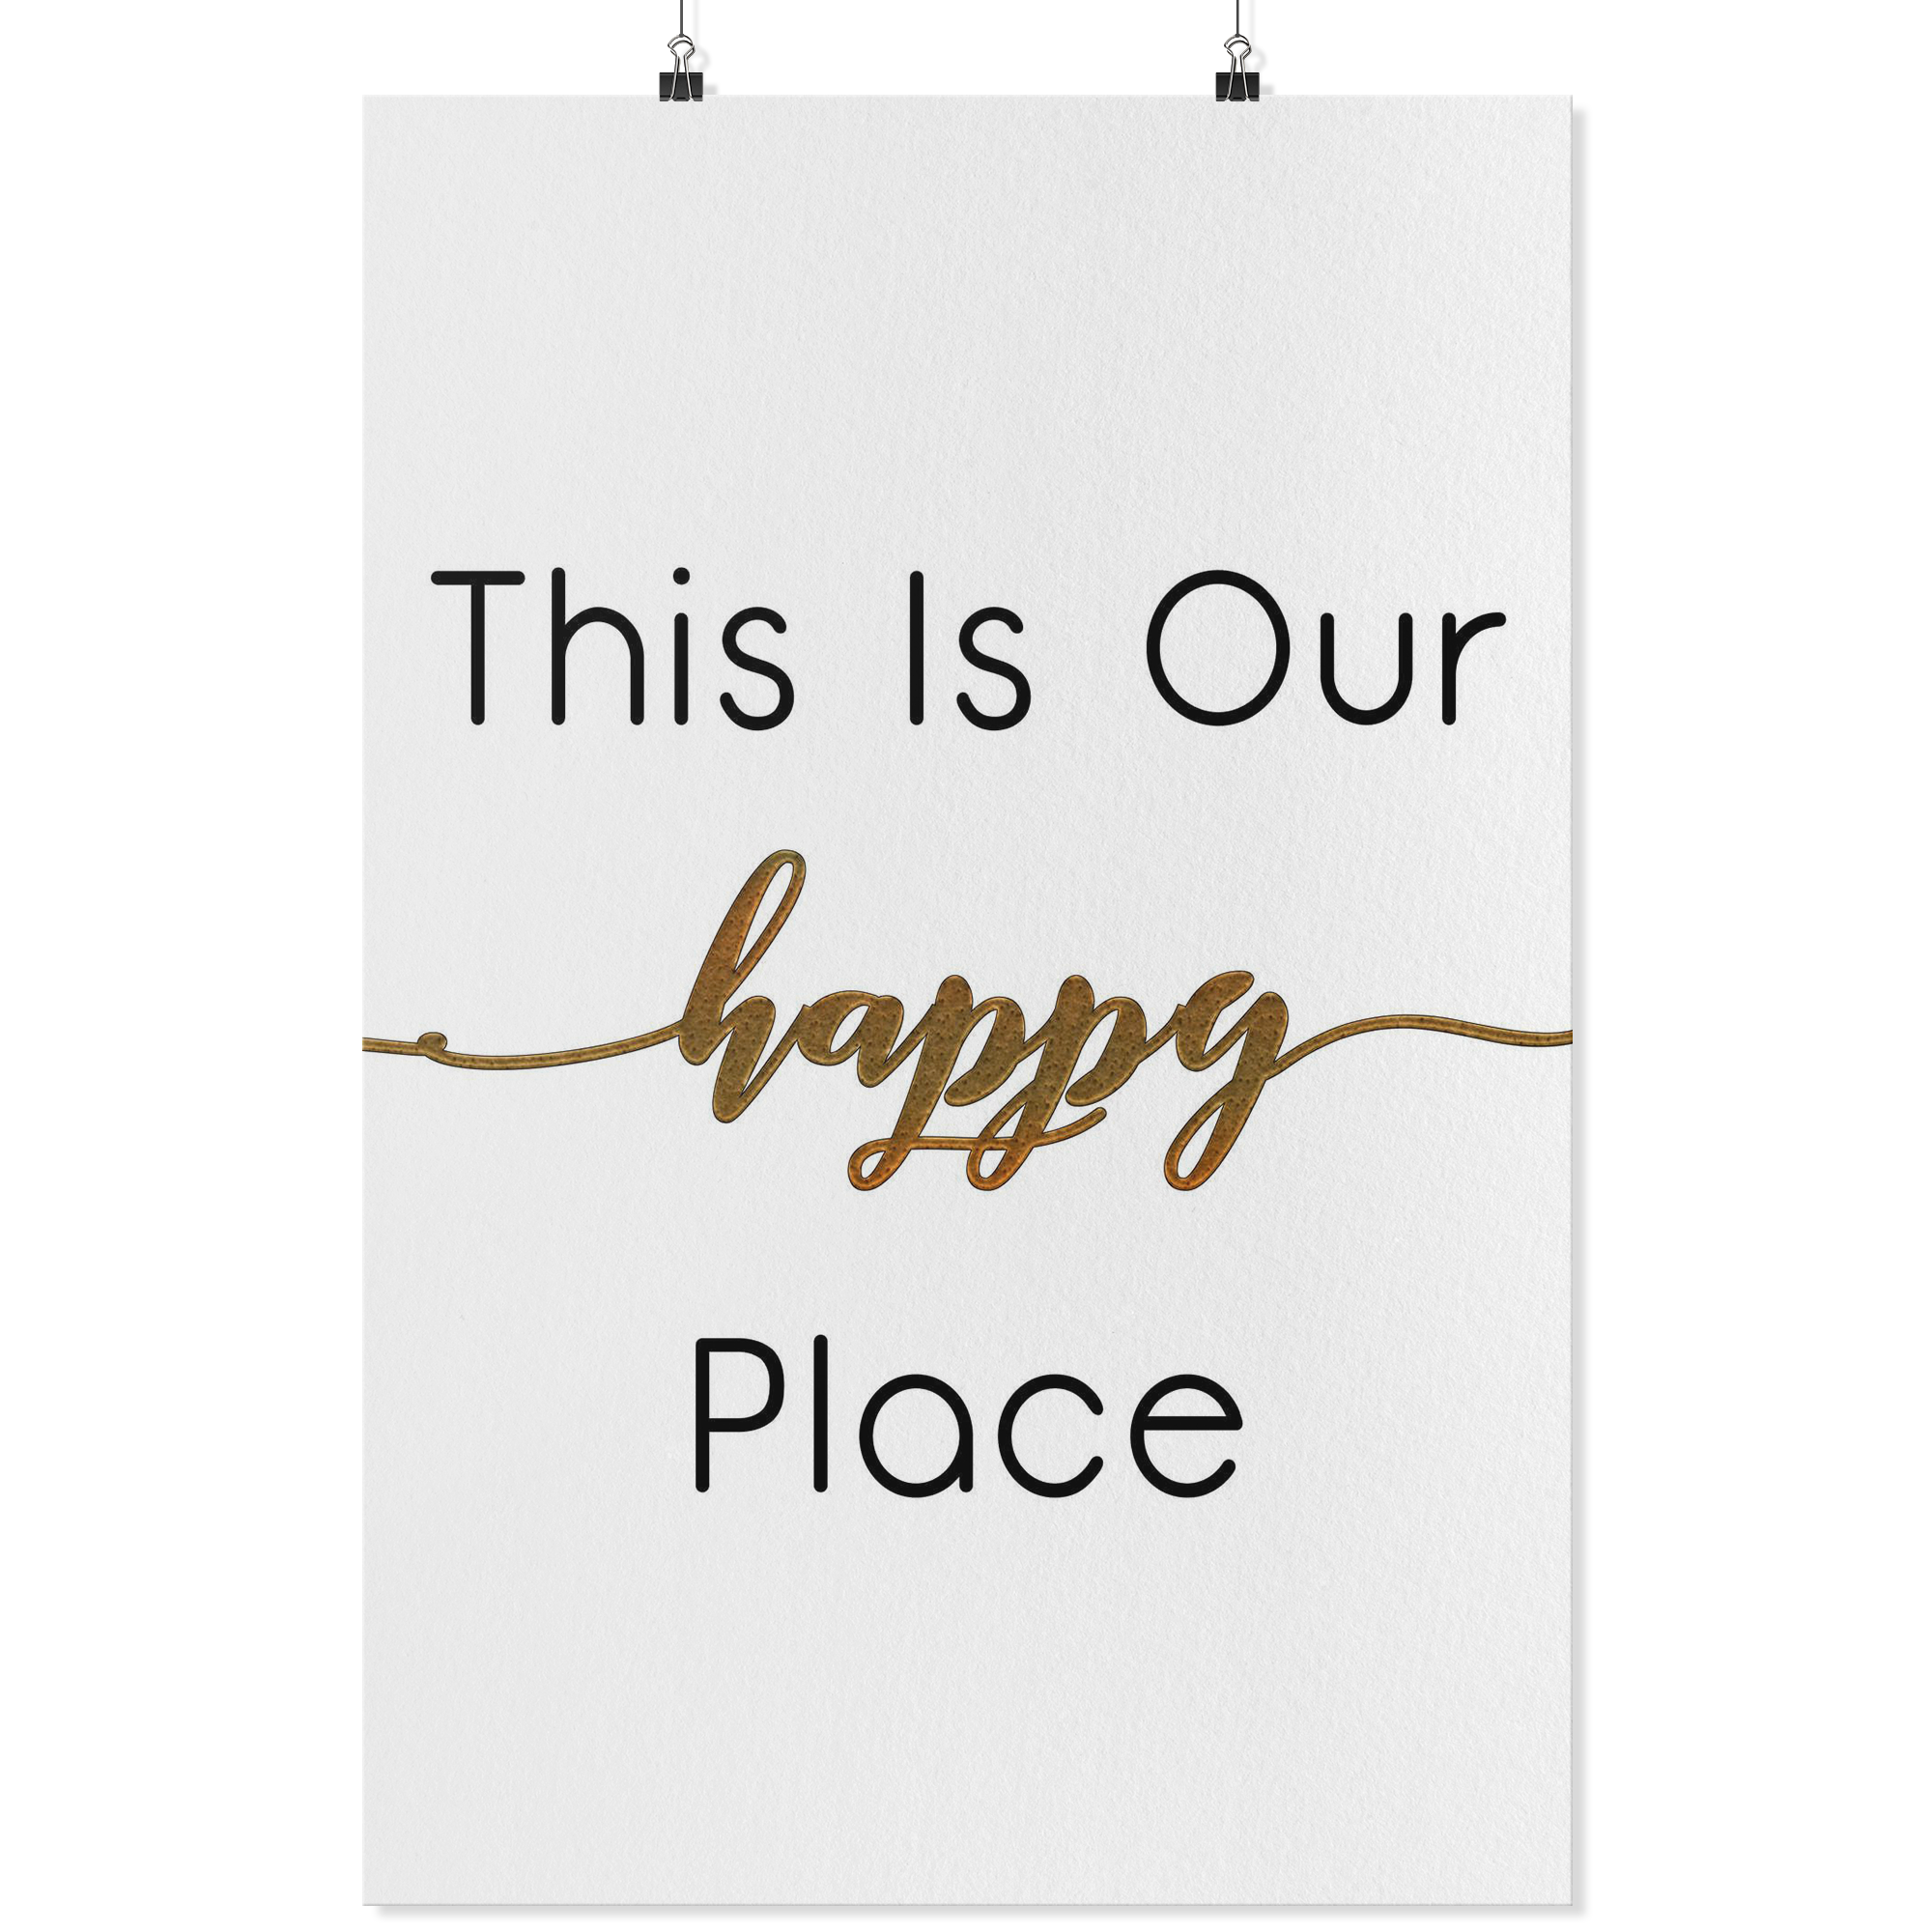 This Is Our Happy Place Poster Prints Wall Arts Typography Wall Decor (No Frame) - 24X36 - Posters 2